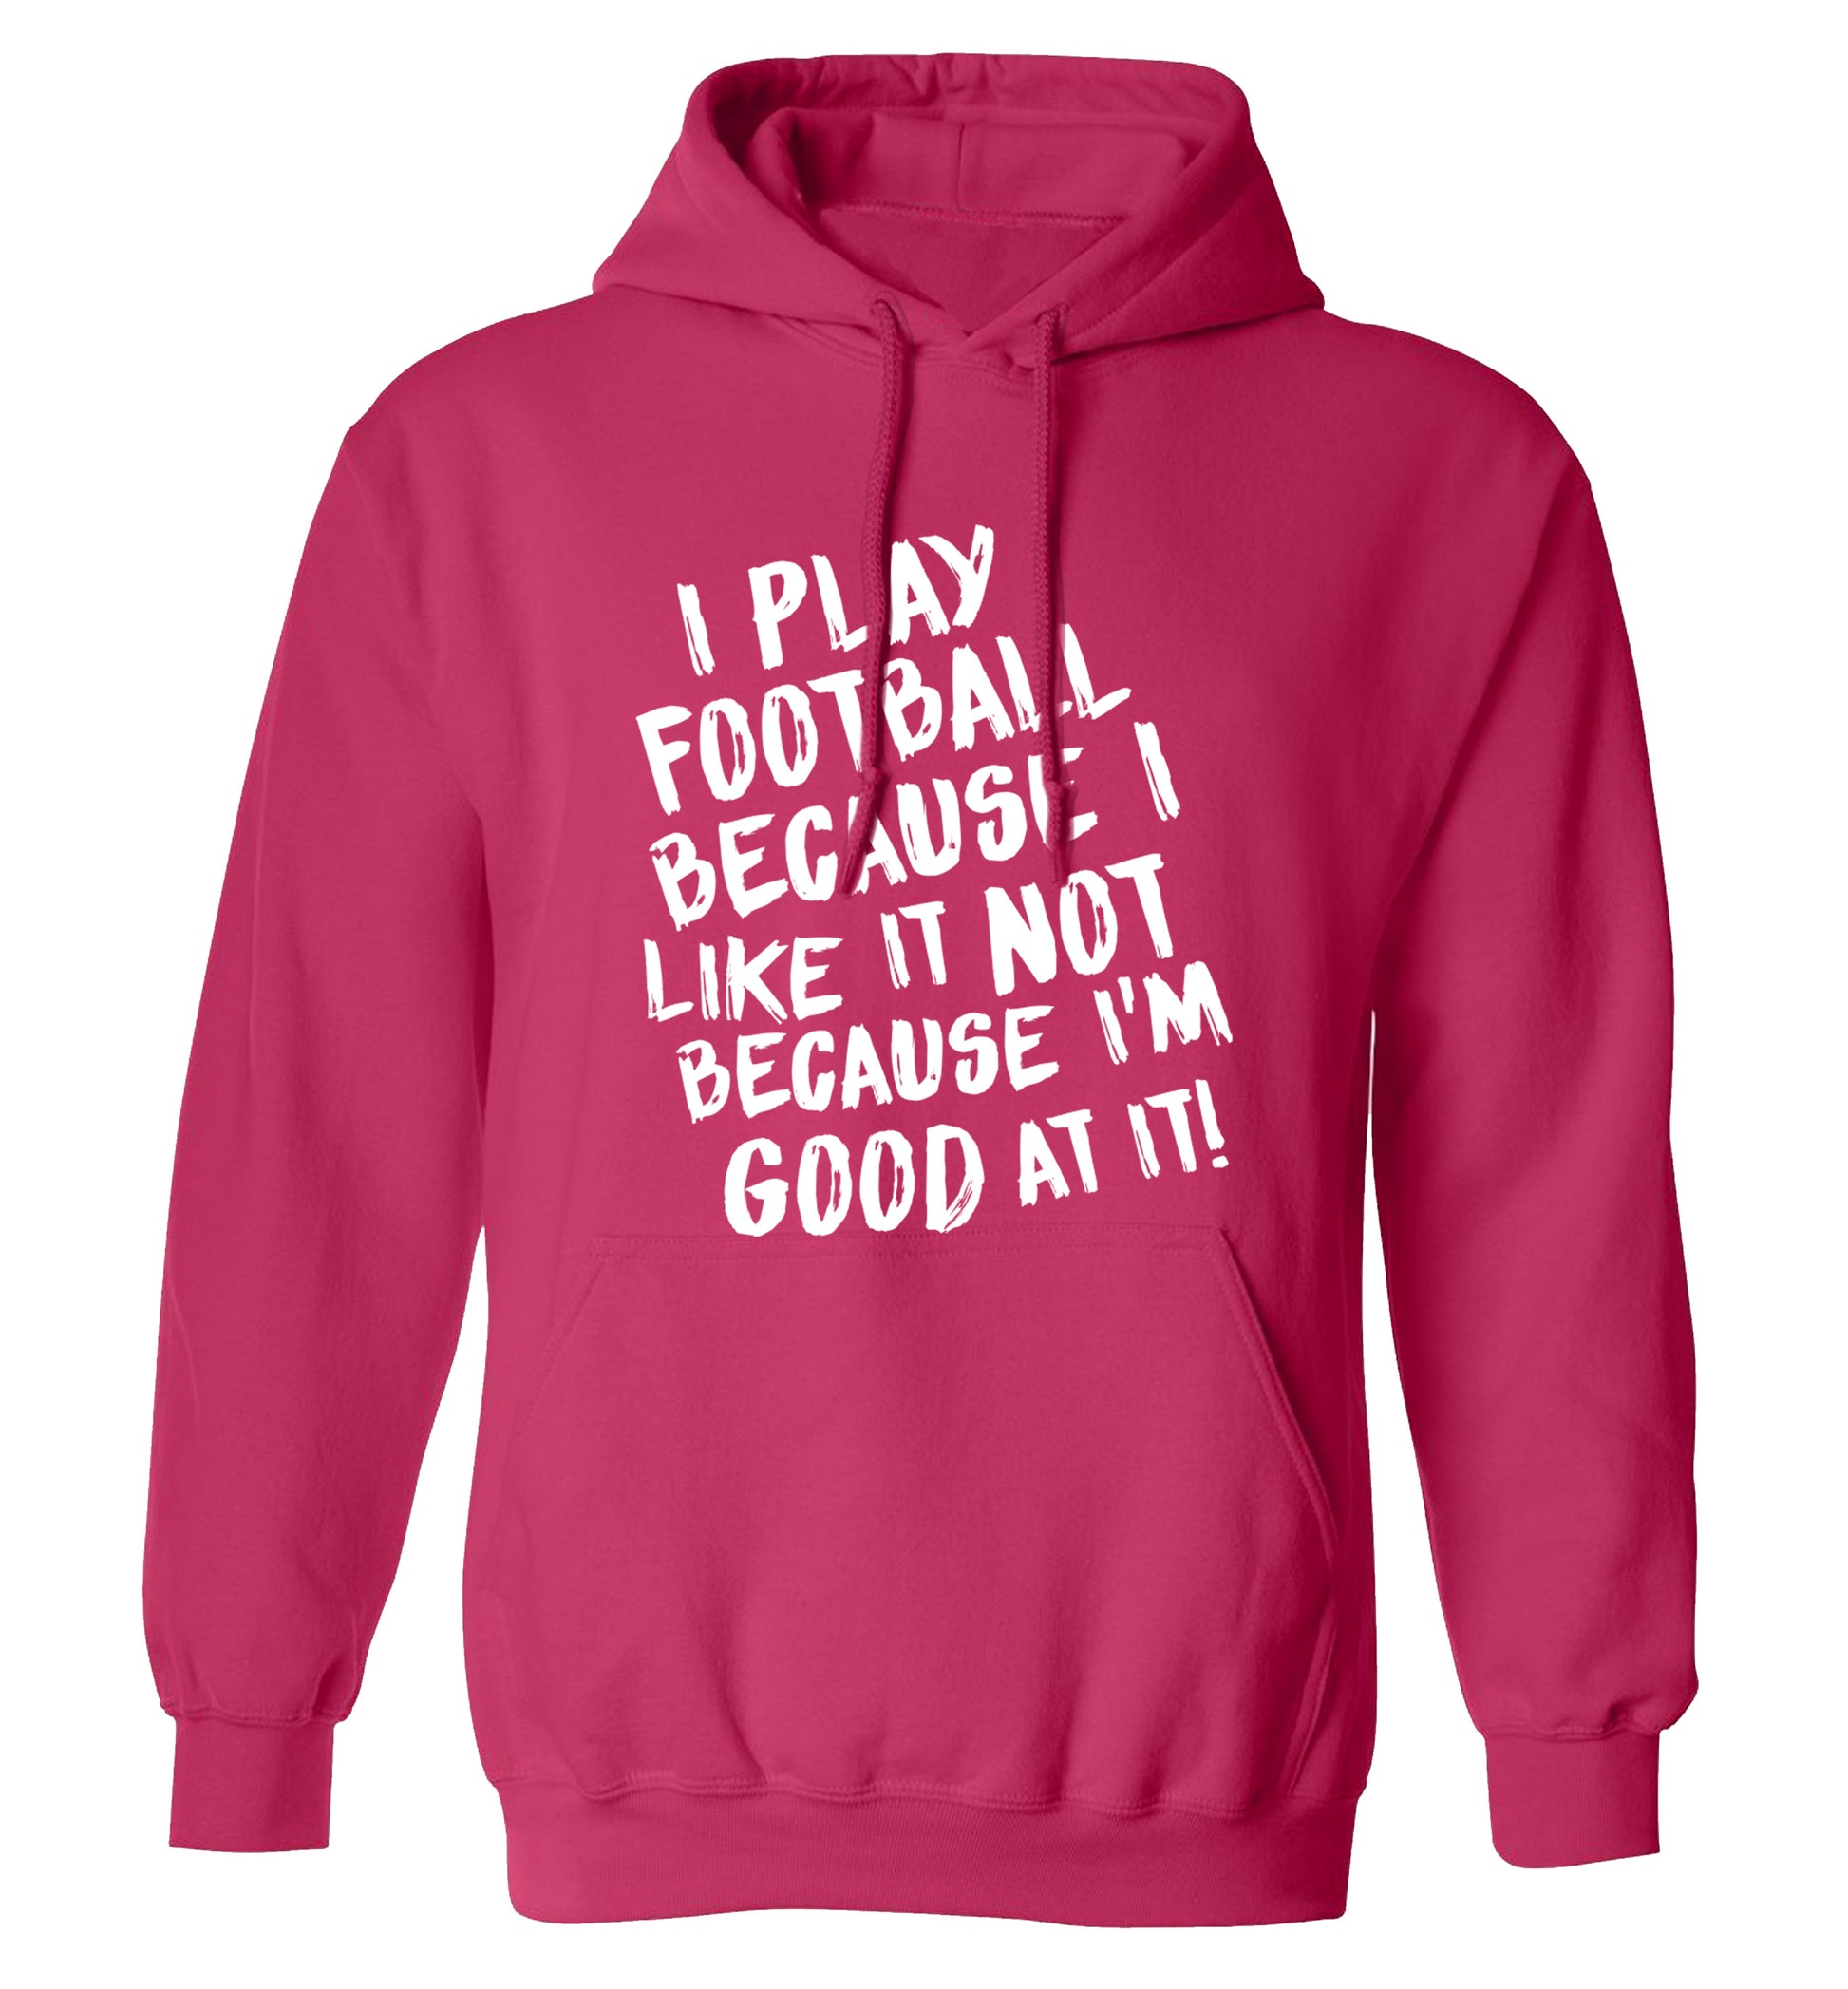 I play football because I like it not because I'm good at it adults unisexpink hoodie 2XL